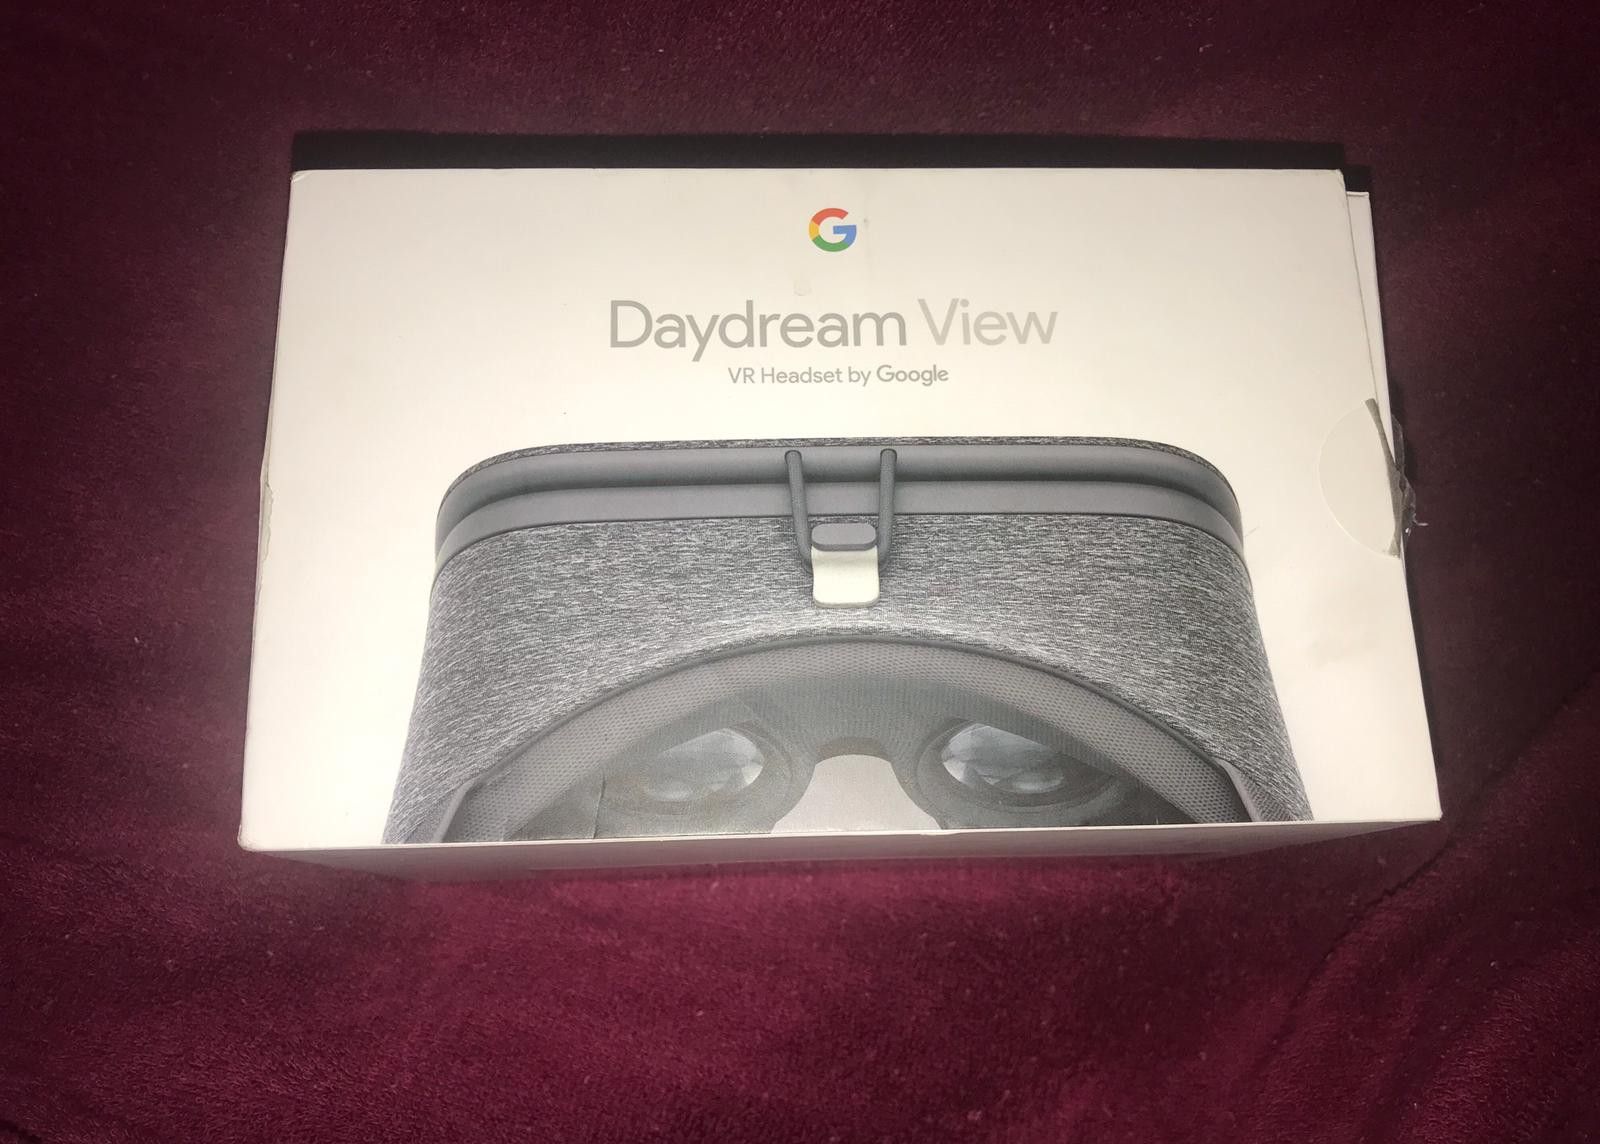 Google Daydream View-VR Headset and Controller $20